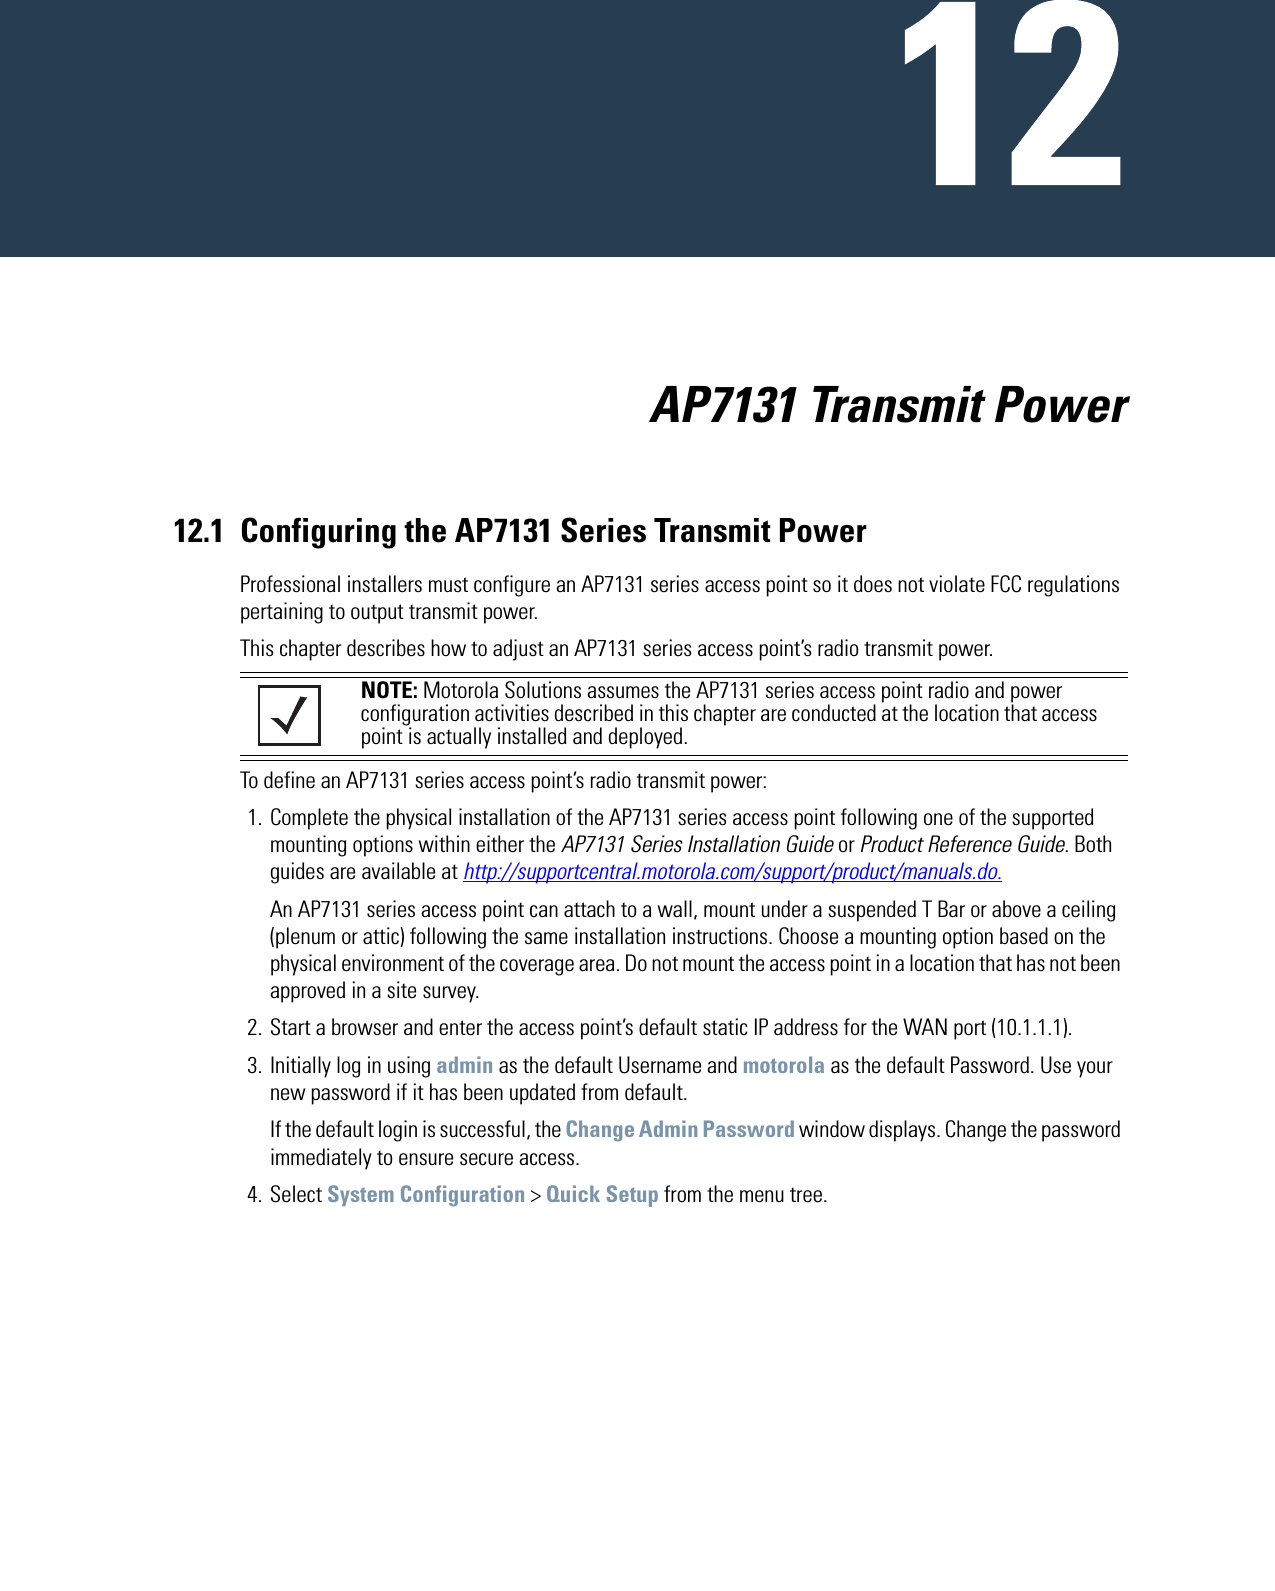                           AP7131 Transmit Power12.1 Configuring the AP7131 Series Transmit PowerProfessional installers must configure an AP7131 series access point so it does not violate FCC regulations pertaining to output transmit power.This chapter describes how to adjust an AP7131 series access point’s radio transmit power.To define an AP7131 series access point’s radio transmit power:1. Complete the physical installation of the AP7131 series access point following one of the supported mounting options within either the AP7131 Series Installation Guide or Product Reference Guide. Both guides are available at http://supportcentral.motorola.com/support/product/manuals.do.An AP7131 series access point can attach to a wall, mount under a suspended T Bar or above a ceiling (plenum or attic) following the same installation instructions. Choose a mounting option based on the physical environment of the coverage area. Do not mount the access point in a location that has not been approved in a site survey.2. Start a browser and enter the access point’s default static IP address for the WAN port (10.1.1.1).3. Initially log in using admin as the default Username and motorola as the default Password. Use your new password if it has been updated from default.If the default login is successful, the Change Admin Password window displays. Change the password immediately to ensure secure access.4. Select System Configuration &gt; Quick Setup from the menu tree.NOTE: Motorola Solutions assumes the AP7131 series access point radio and power configuration activities described in this chapter are conducted at the location that access point is actually installed and deployed. 